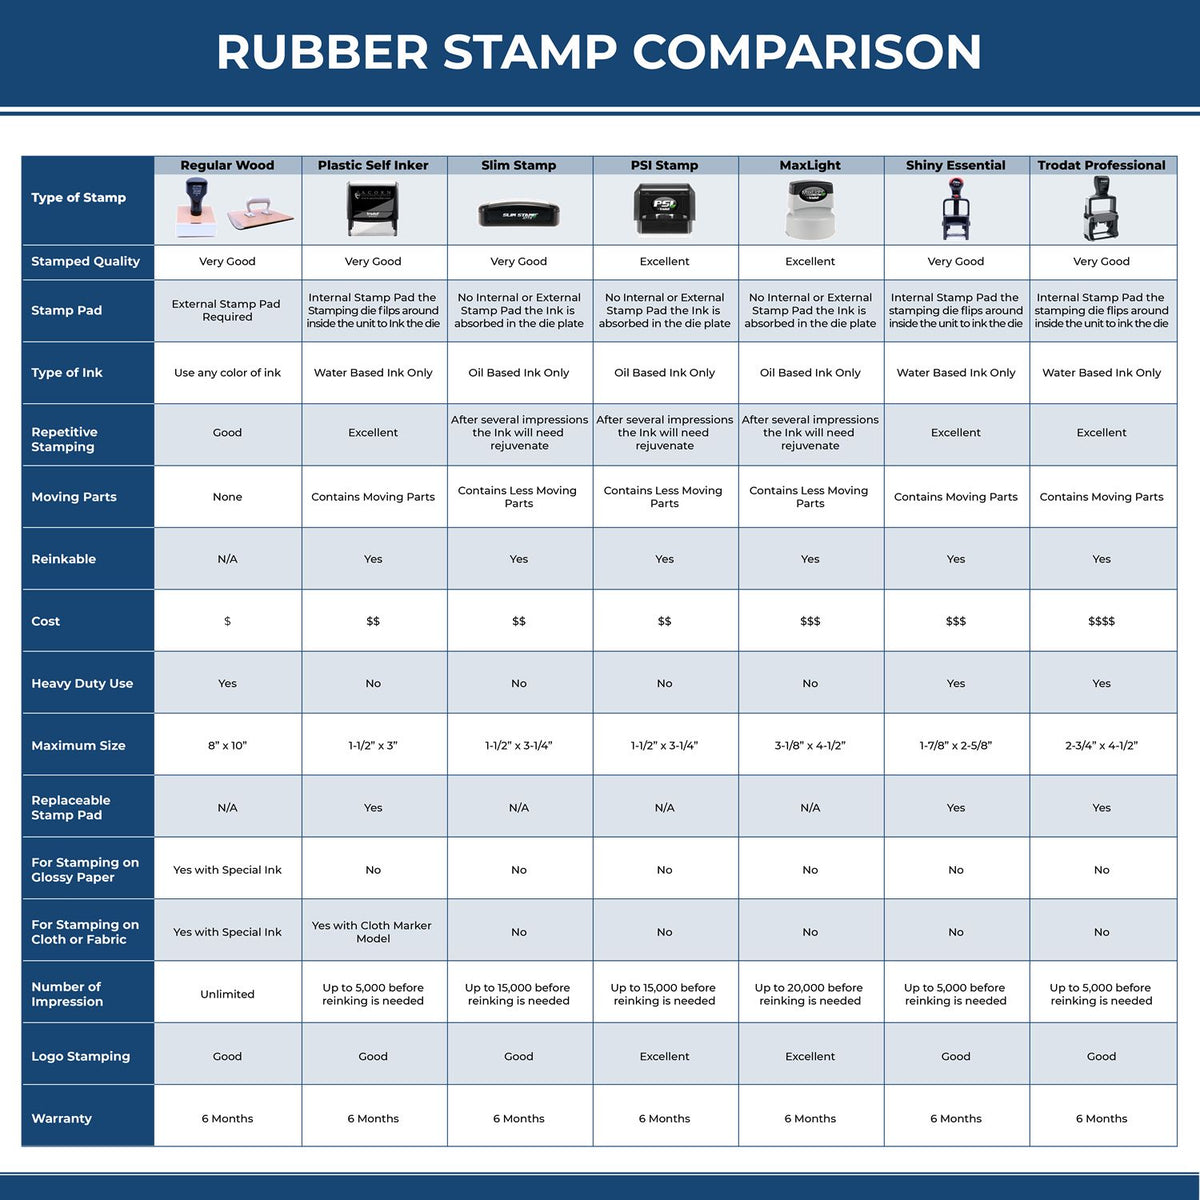 A comparison chart for the different types of mount models available for the Super Slim Idaho Notary Public Stamp.